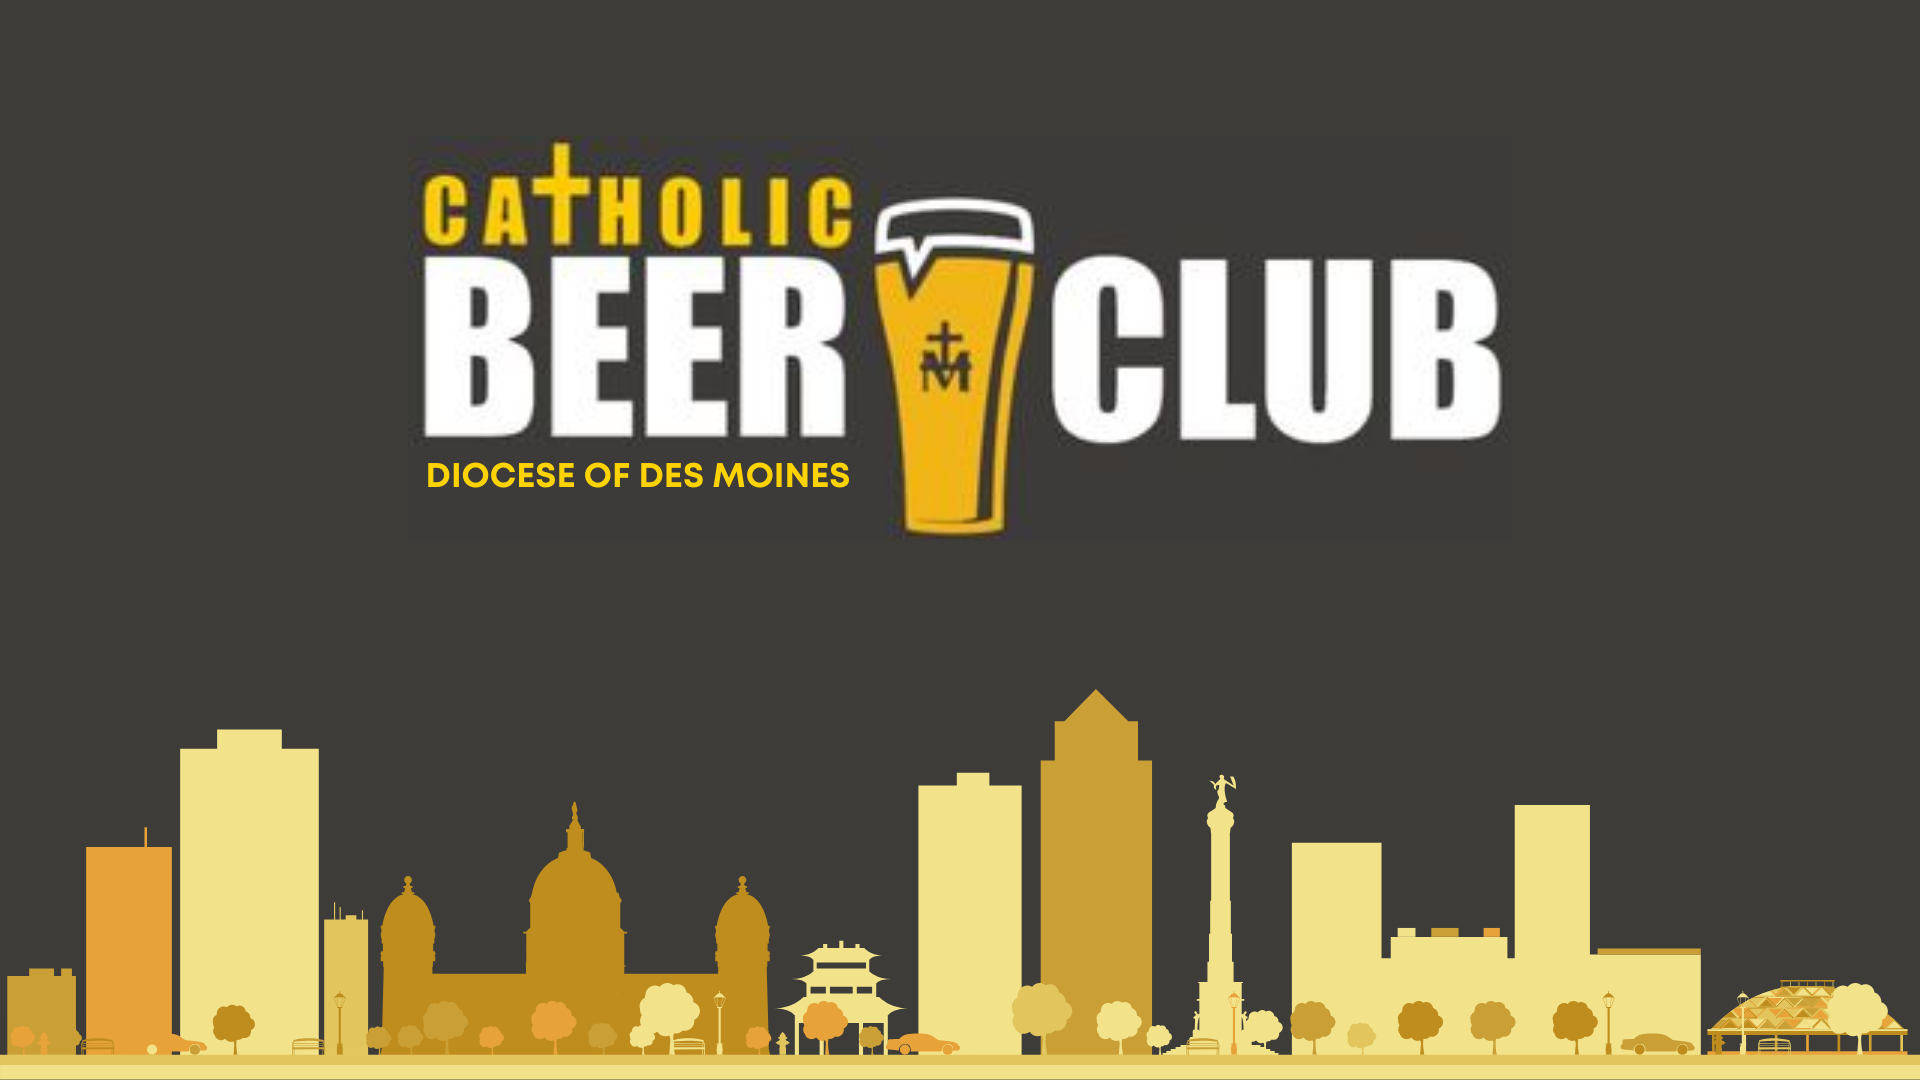 Catholic Beer Club Diocese of Des Moines